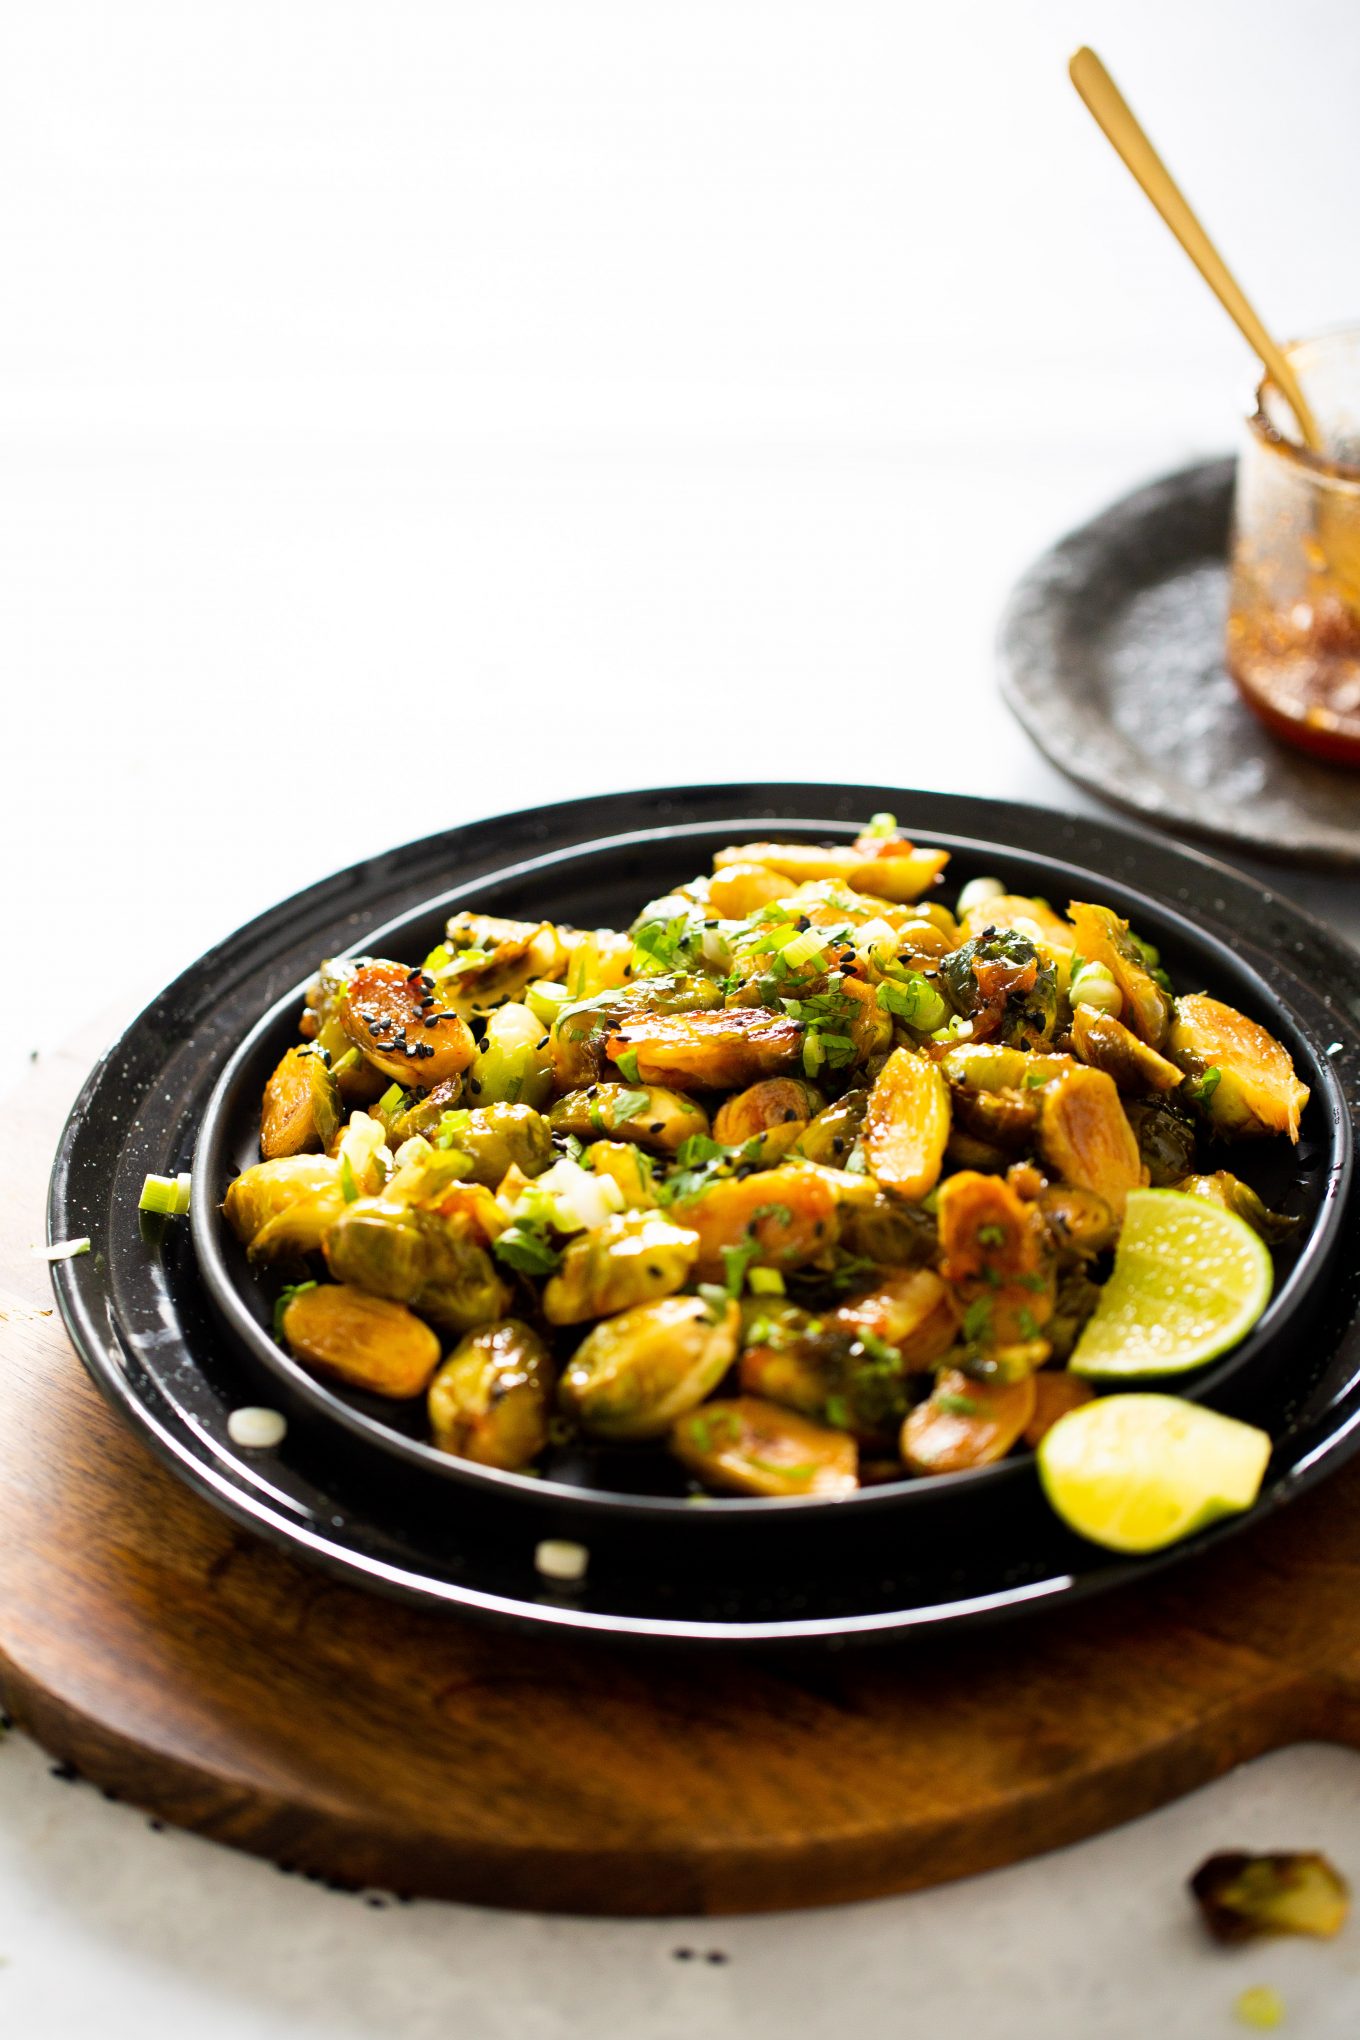 Raosted brussel sprouts with sweet and spicy sauce